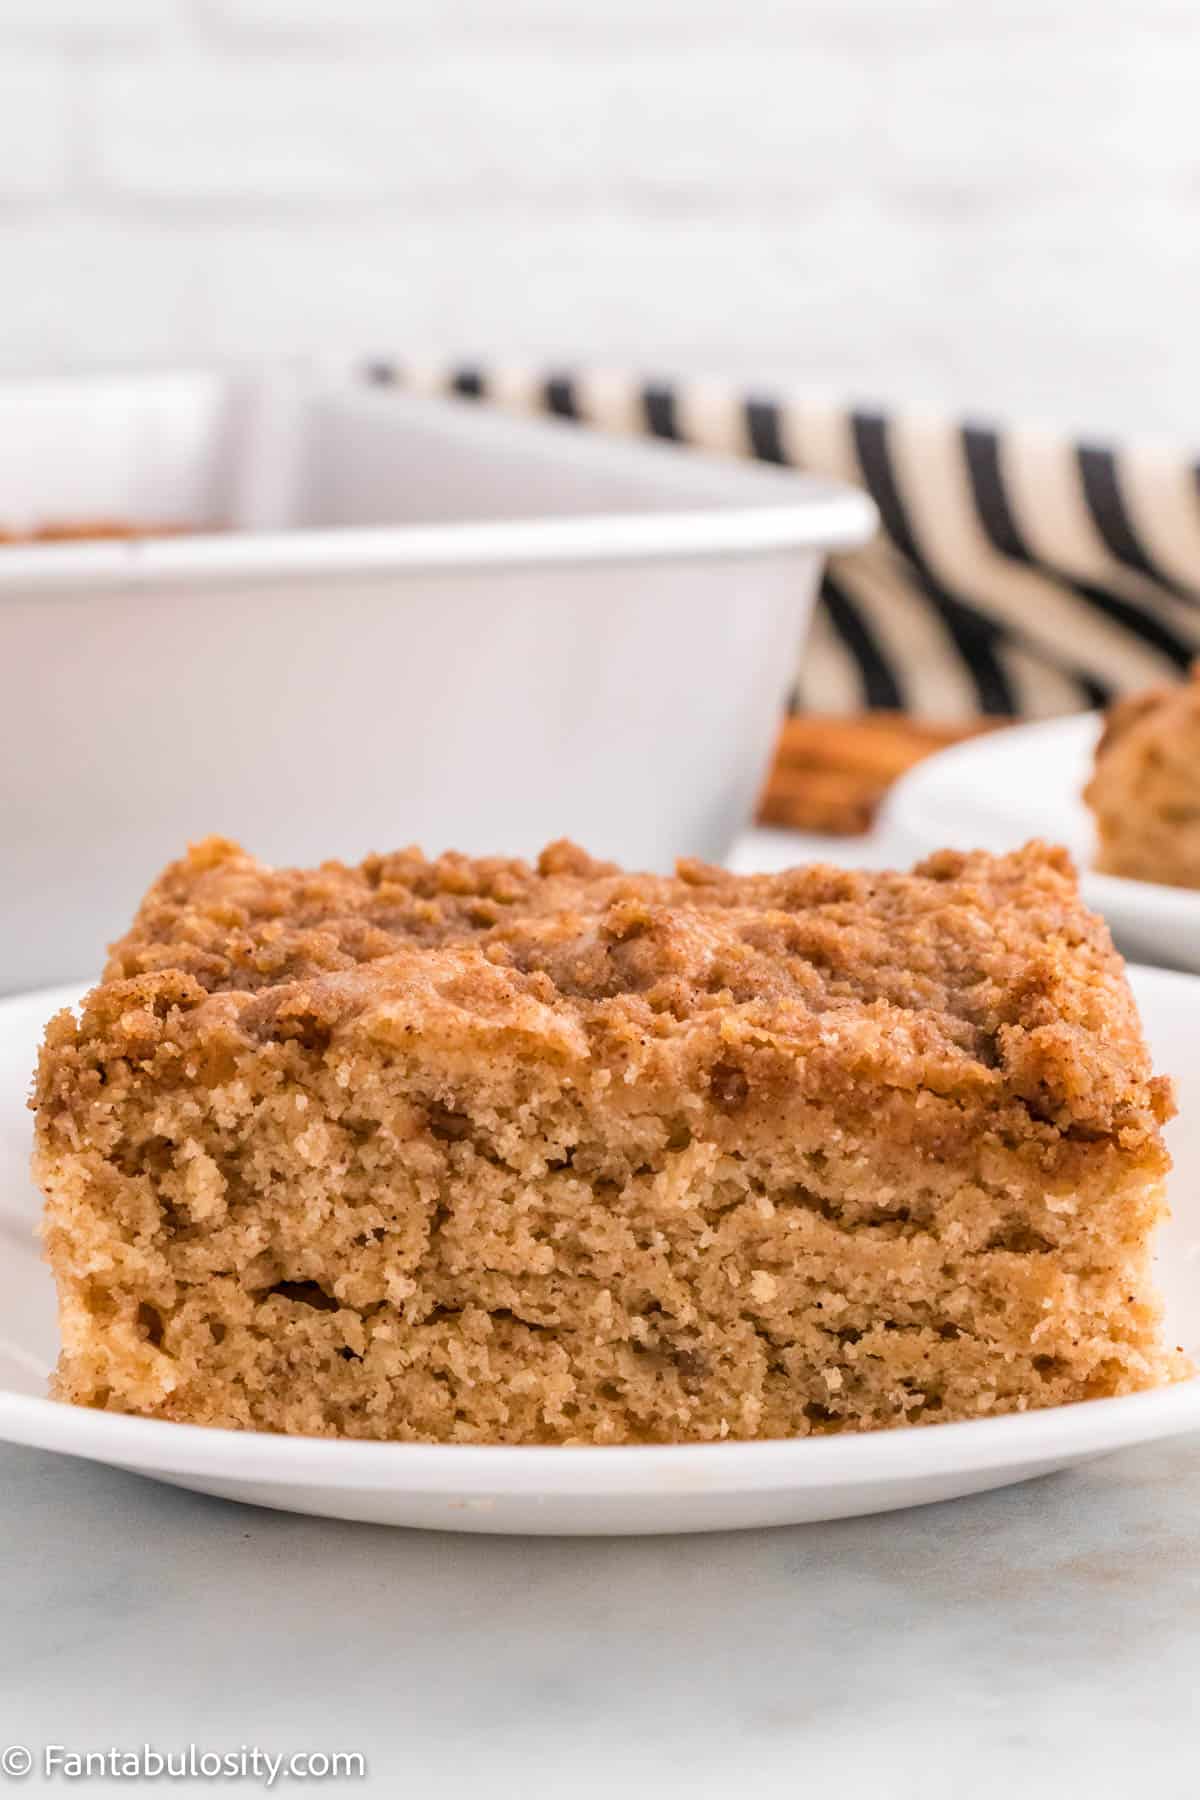 A slice of Cinnamon Coffee Cake on a white plate is in the center of the photo with the pan of cake in the background